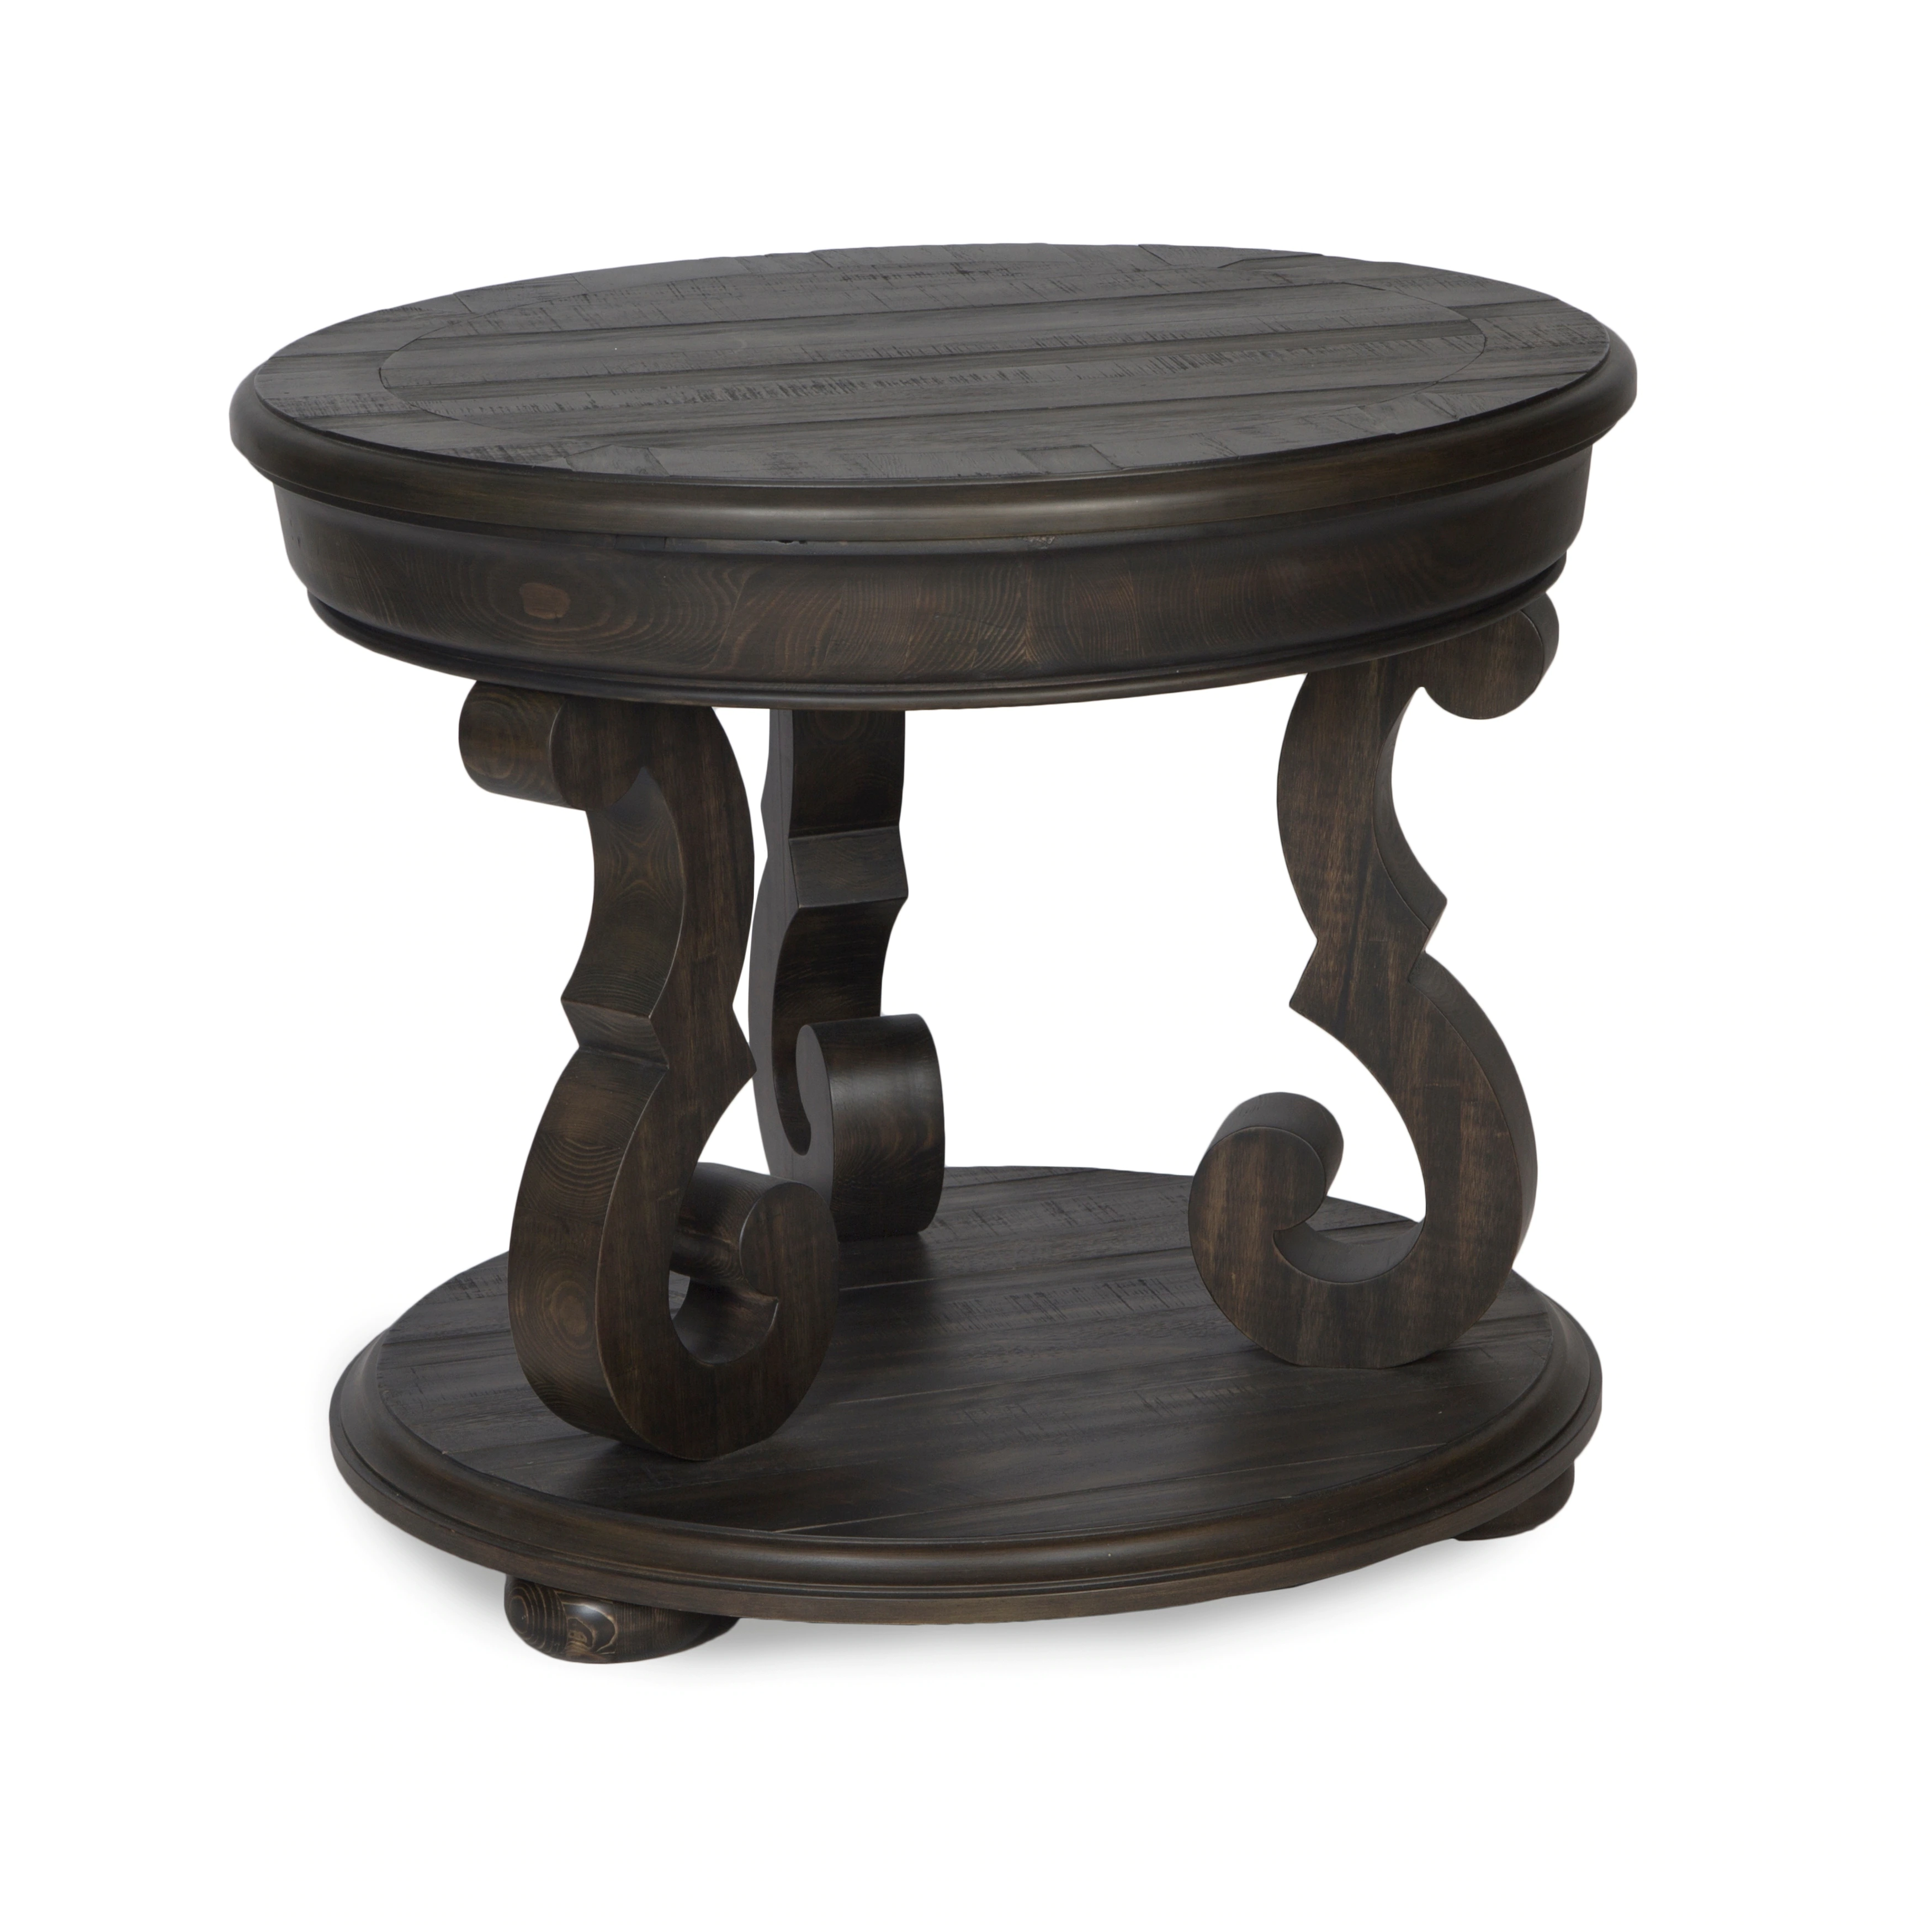 florence traditional distressed charcoal rustic round accent table avalon free shipping today inch console small garden cover and chairs driftwood side outdoor beach kitchen decor